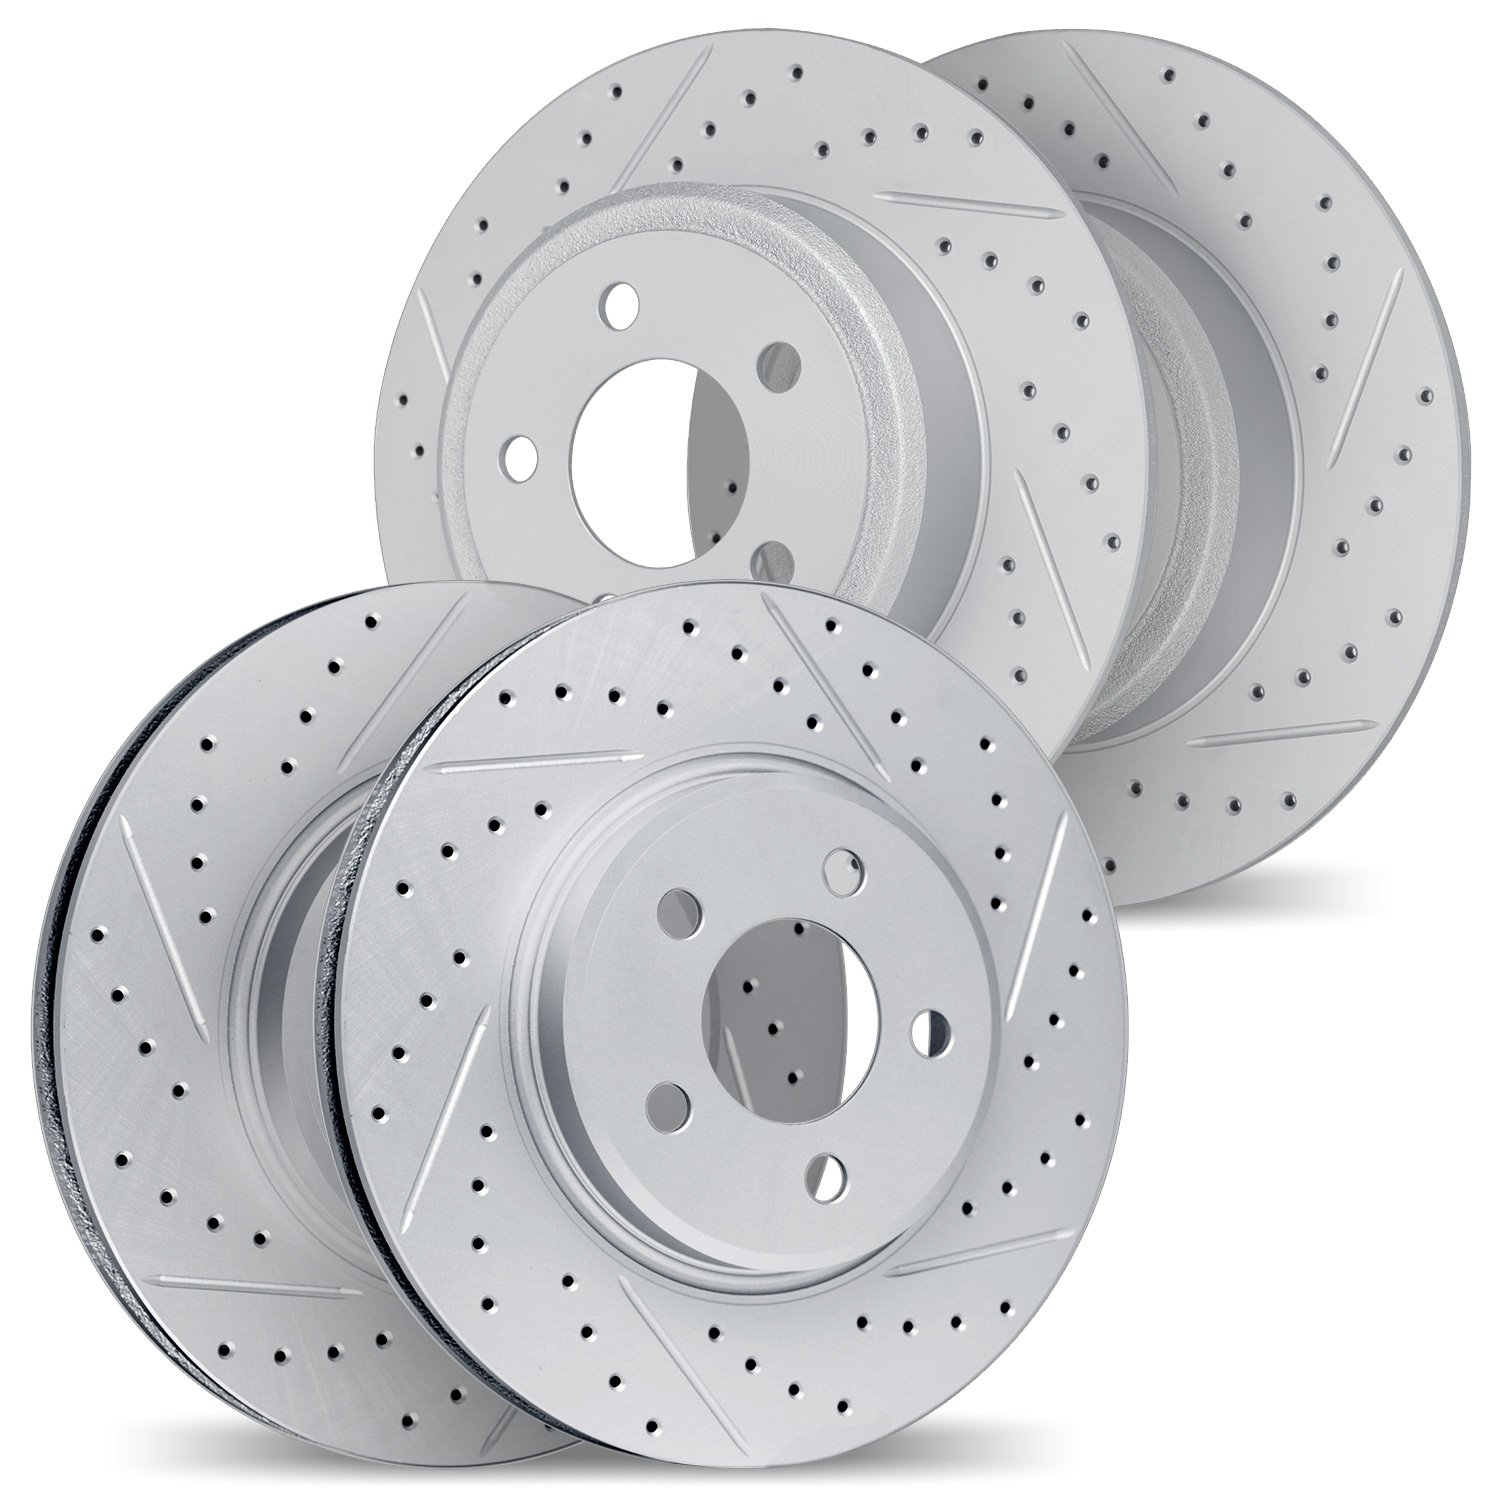 2004-27008 Geoperformance Drilled/Slotted Brake Rotors, 2012-2013 Volvo, Position: Front and Rear